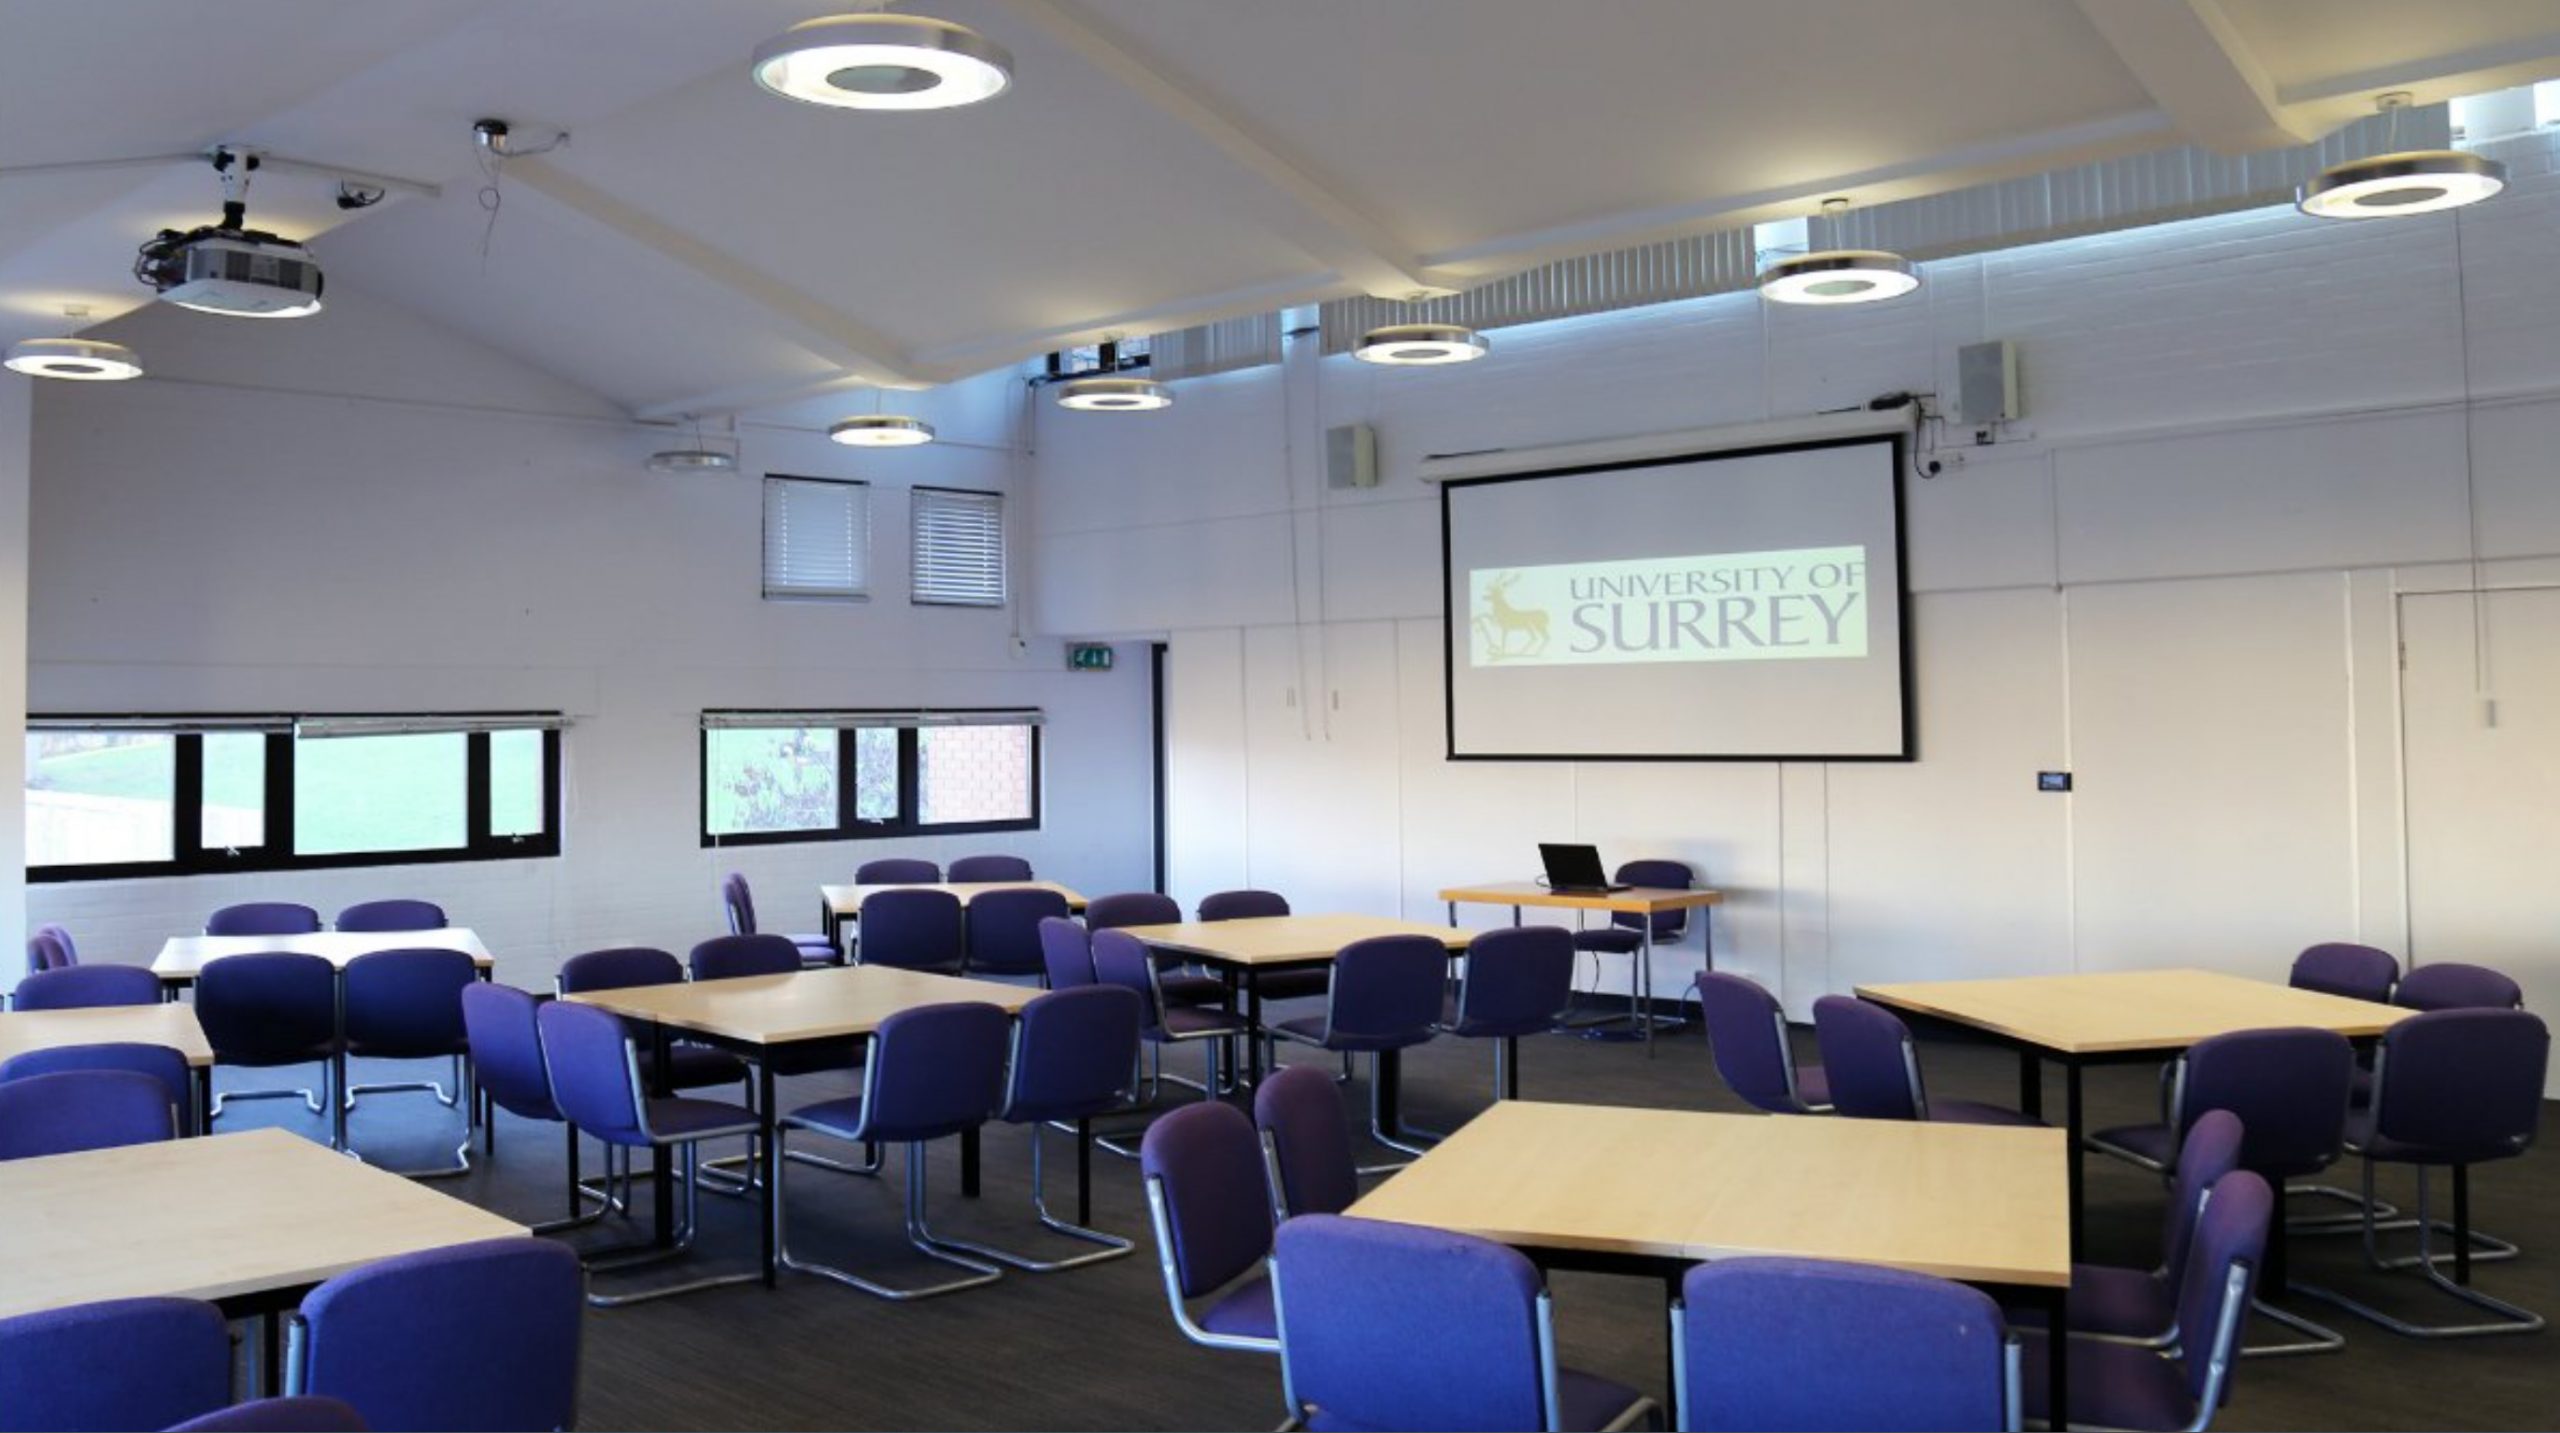 University of Surrey Conference Room